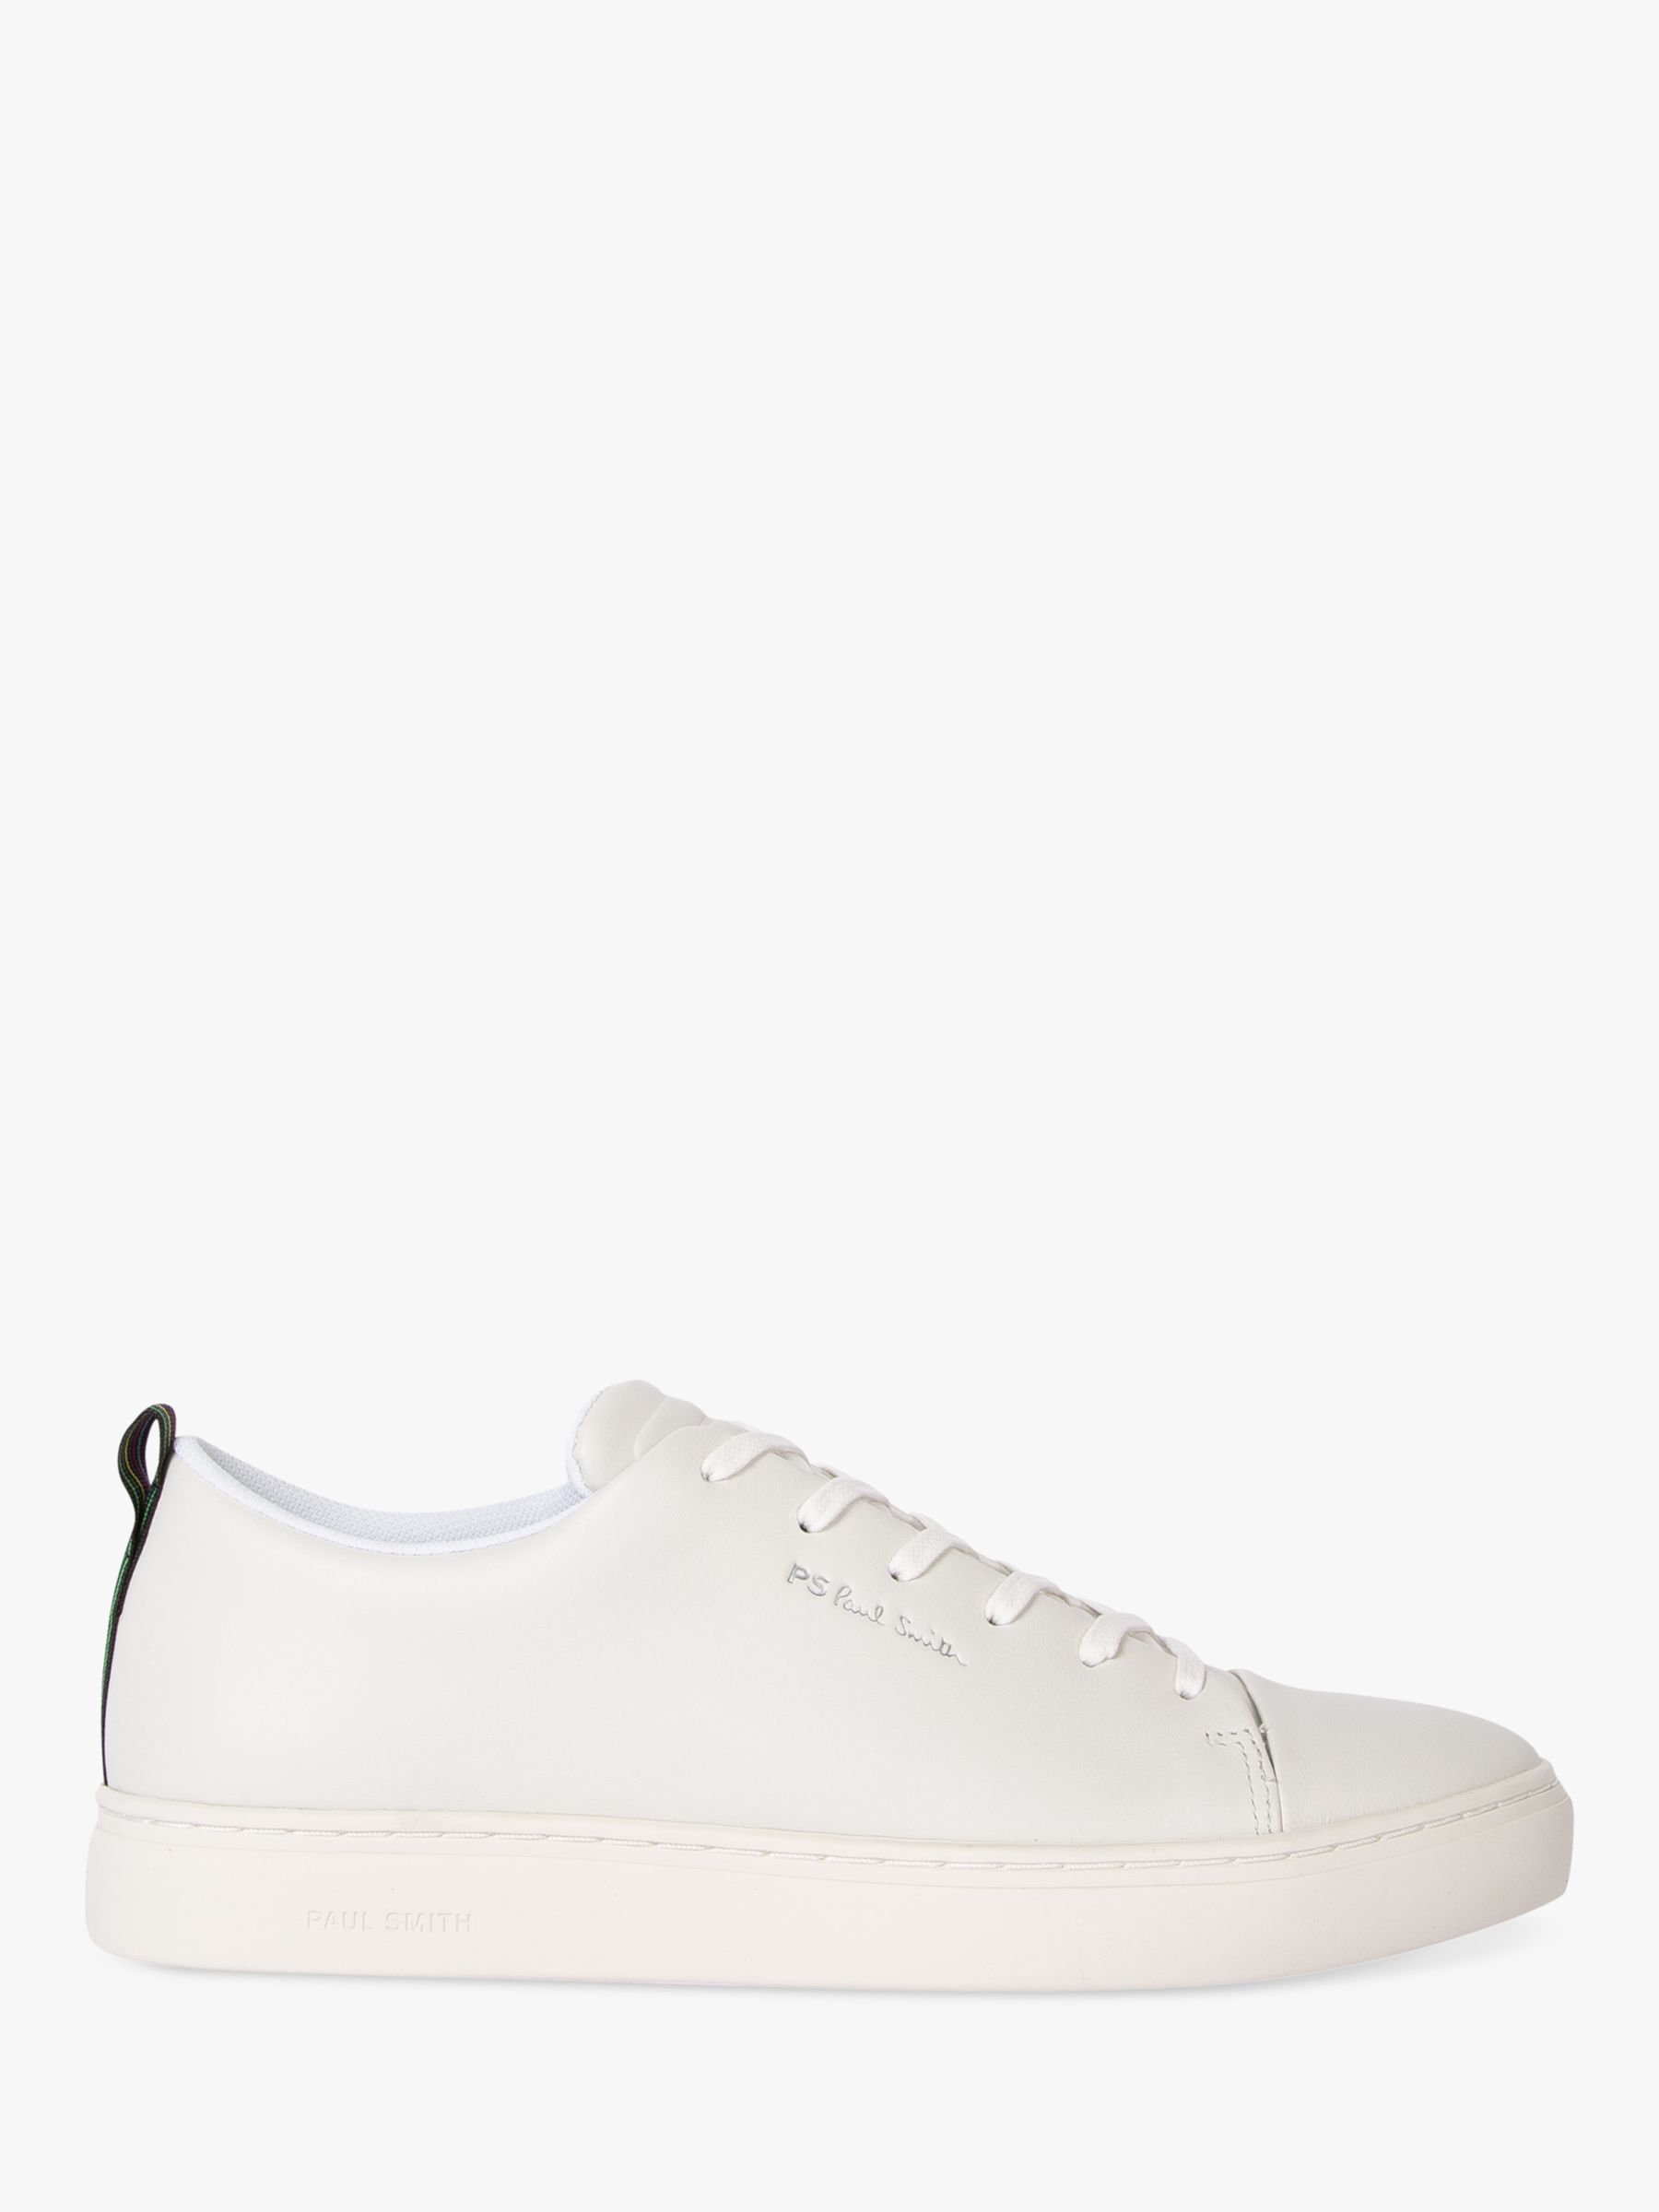 Paul Smith Lee Cupsole Trainers, White at John Lewis & Partners